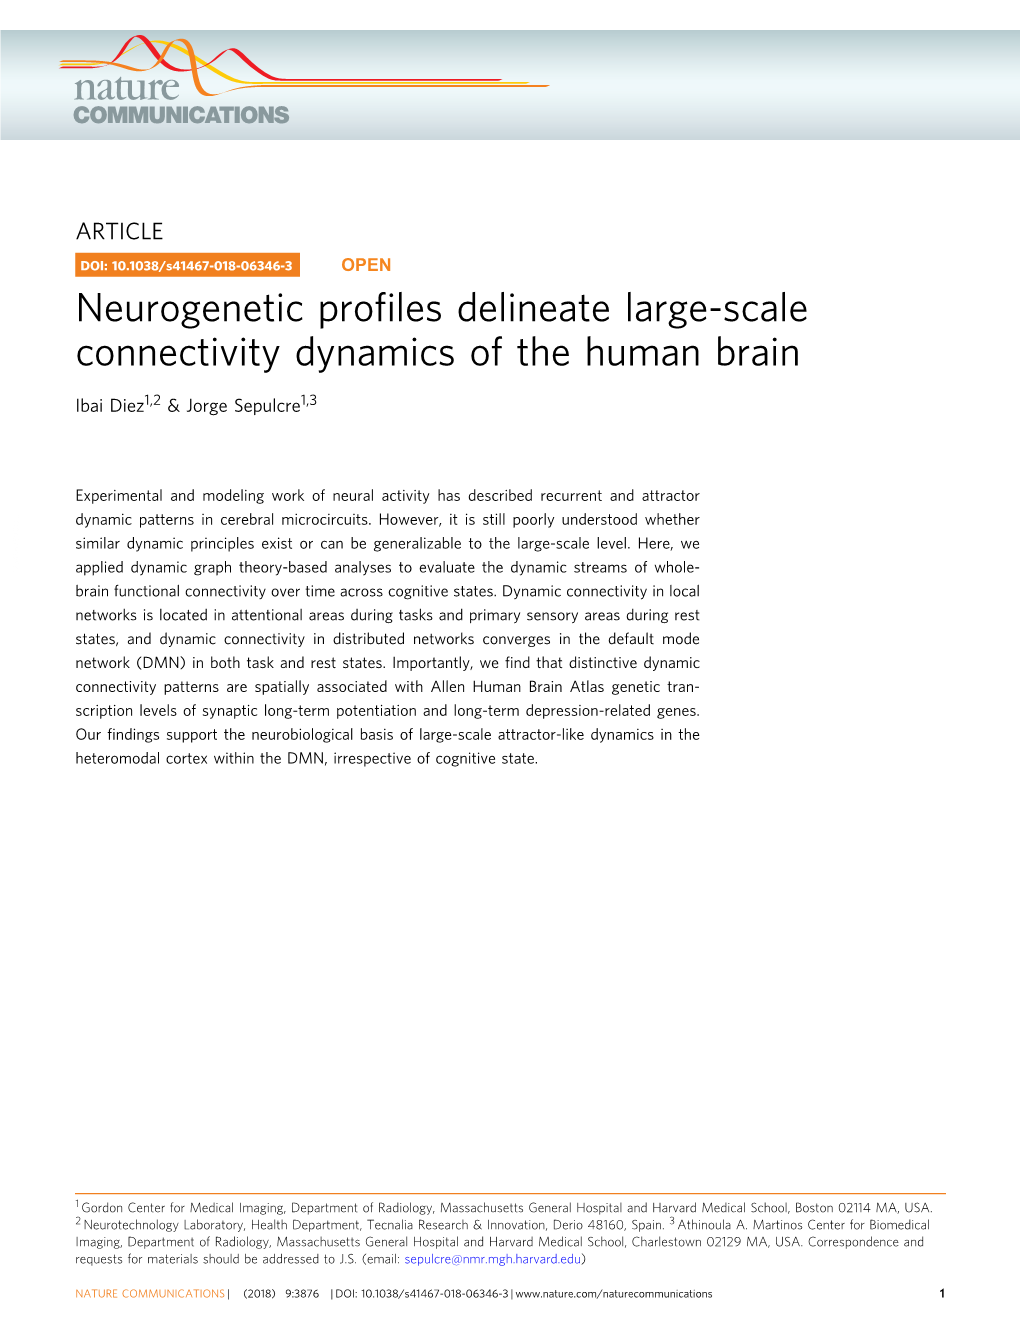 Neurogenetic Profiles Delineate Large-Scale Connectivity Dynamics